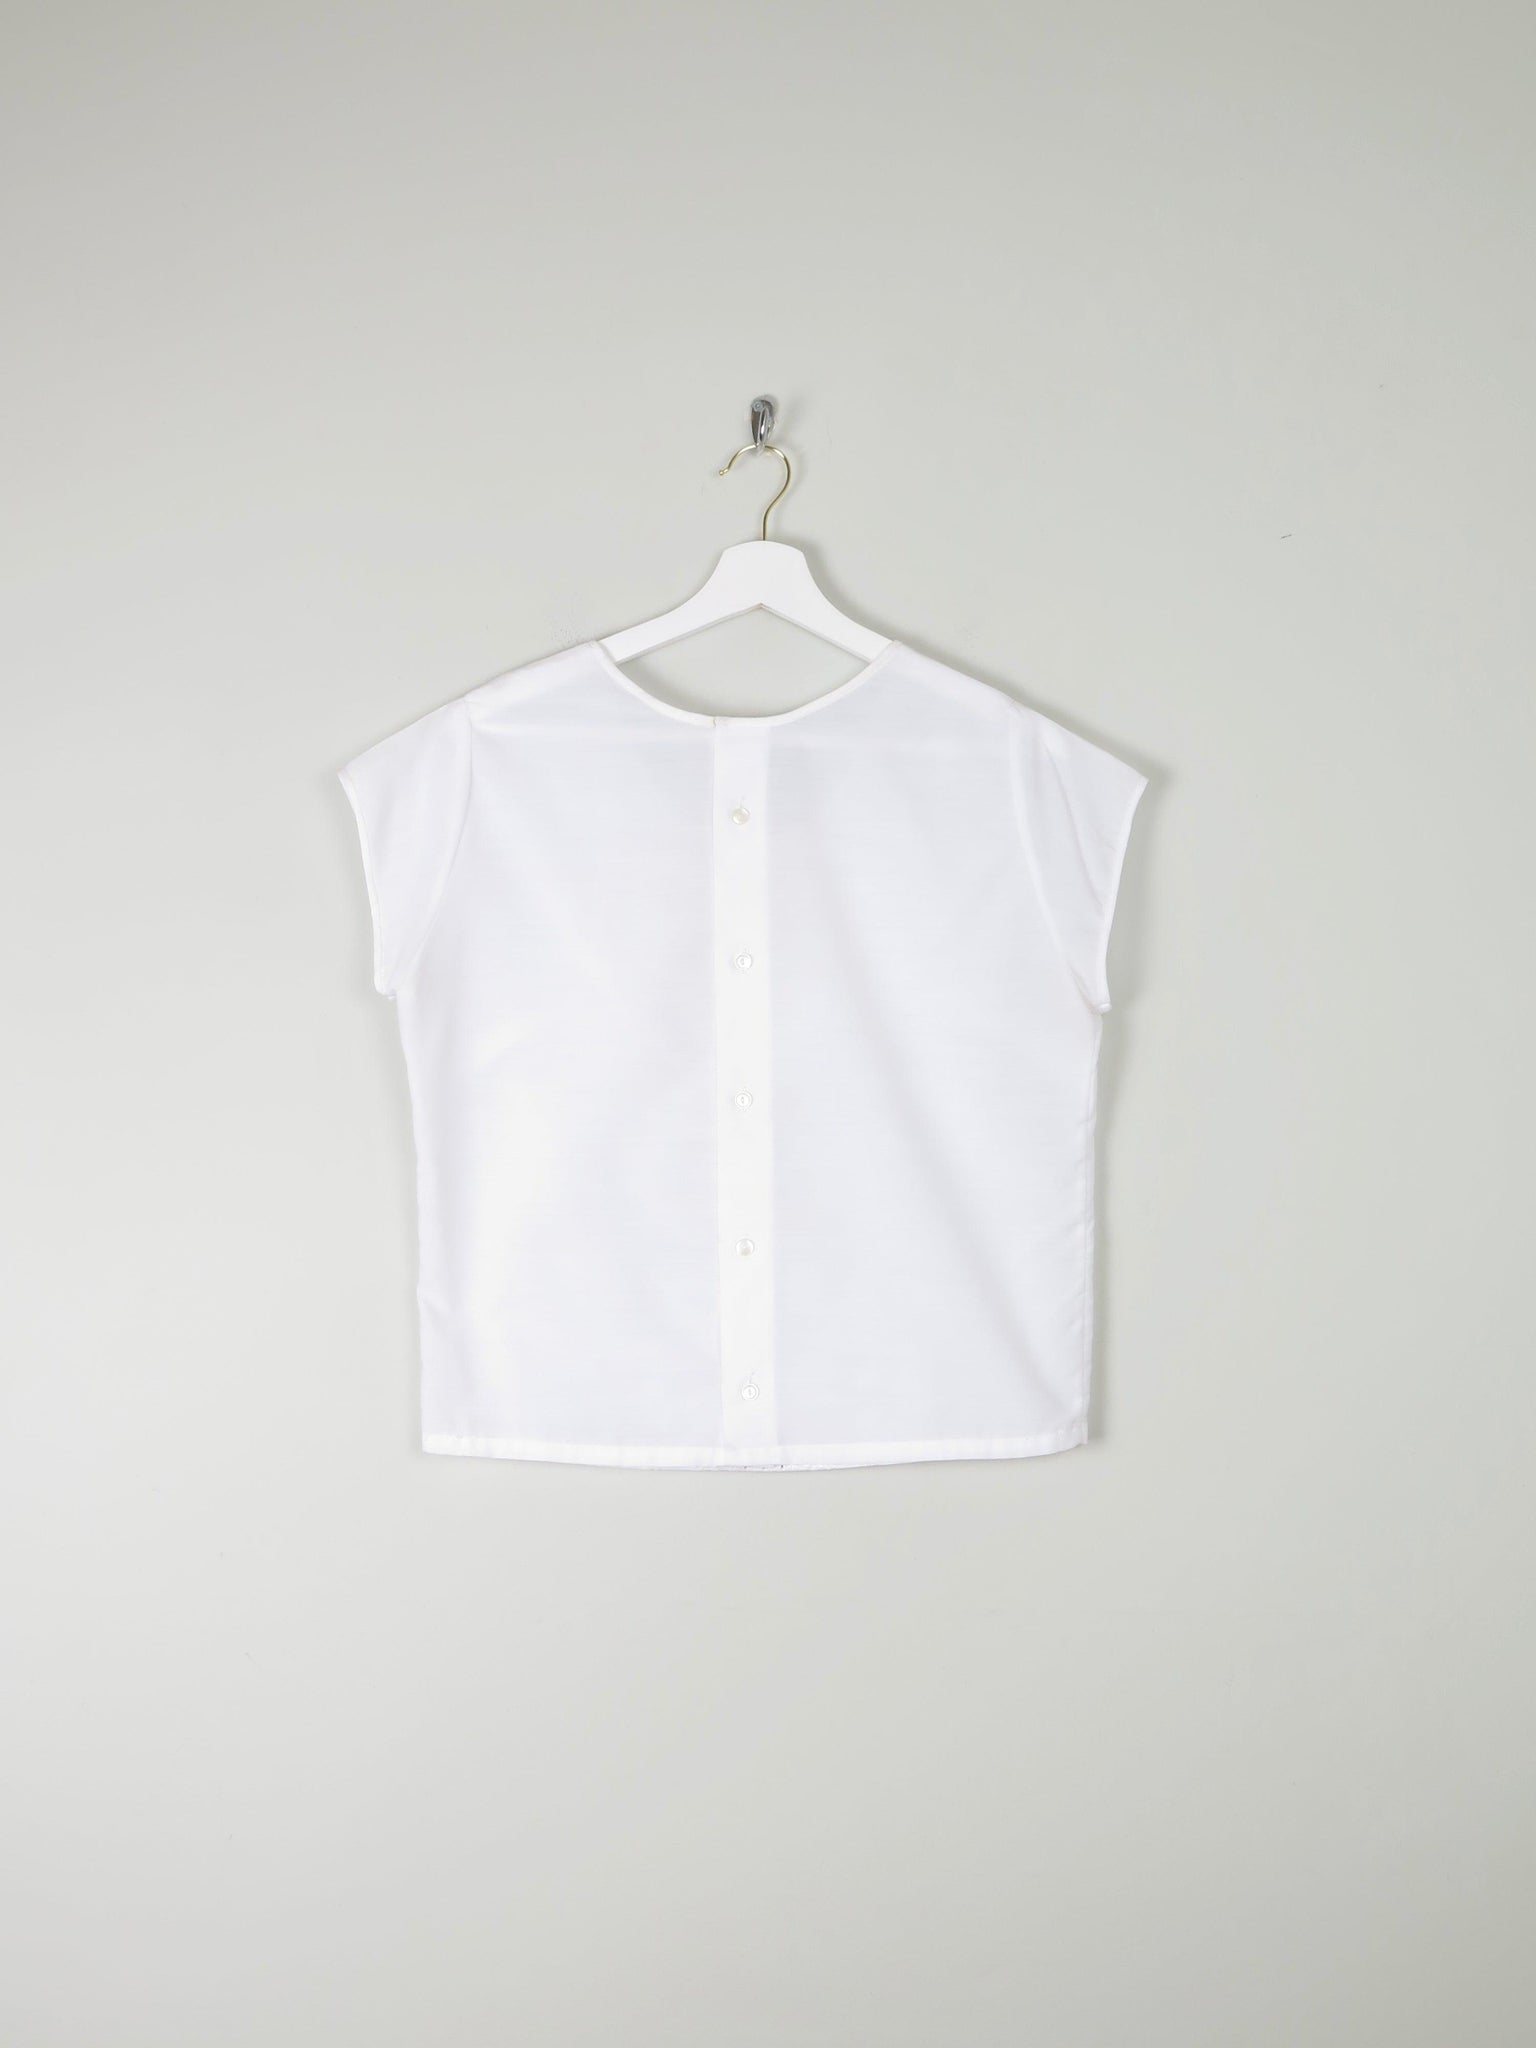 Vintage White Blouse With Short Sleeves L - The Harlequin